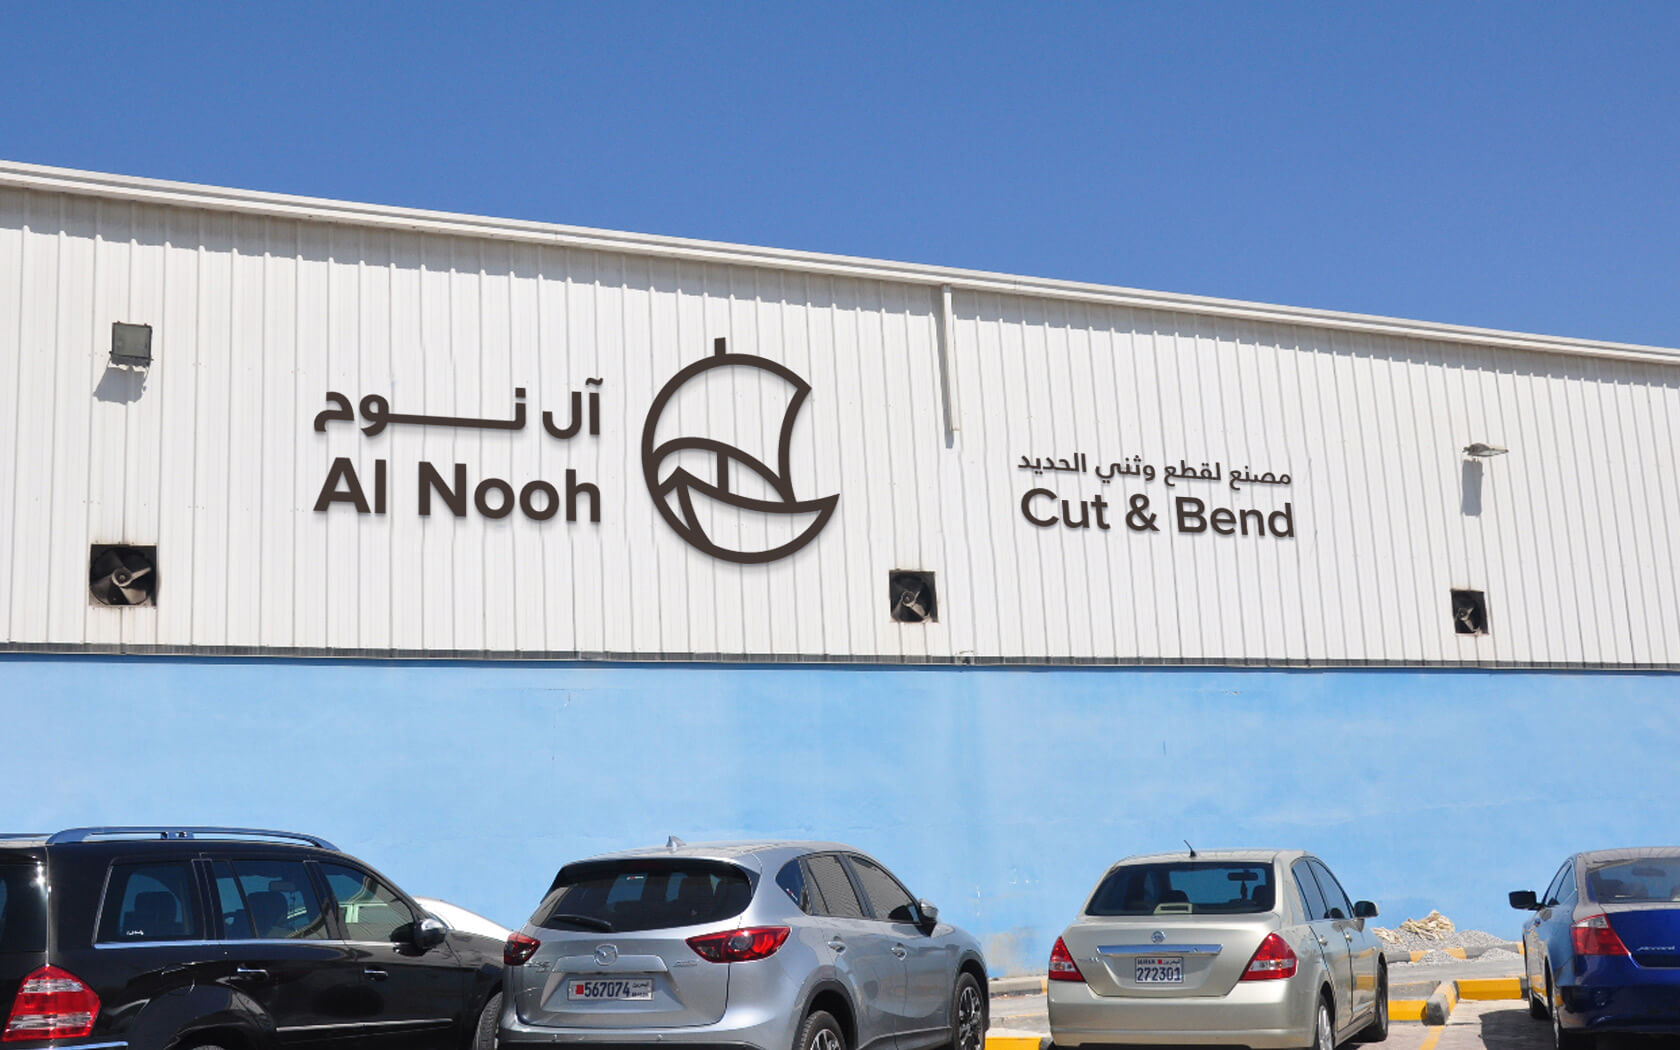 Al Nooh. Sign with brand logo